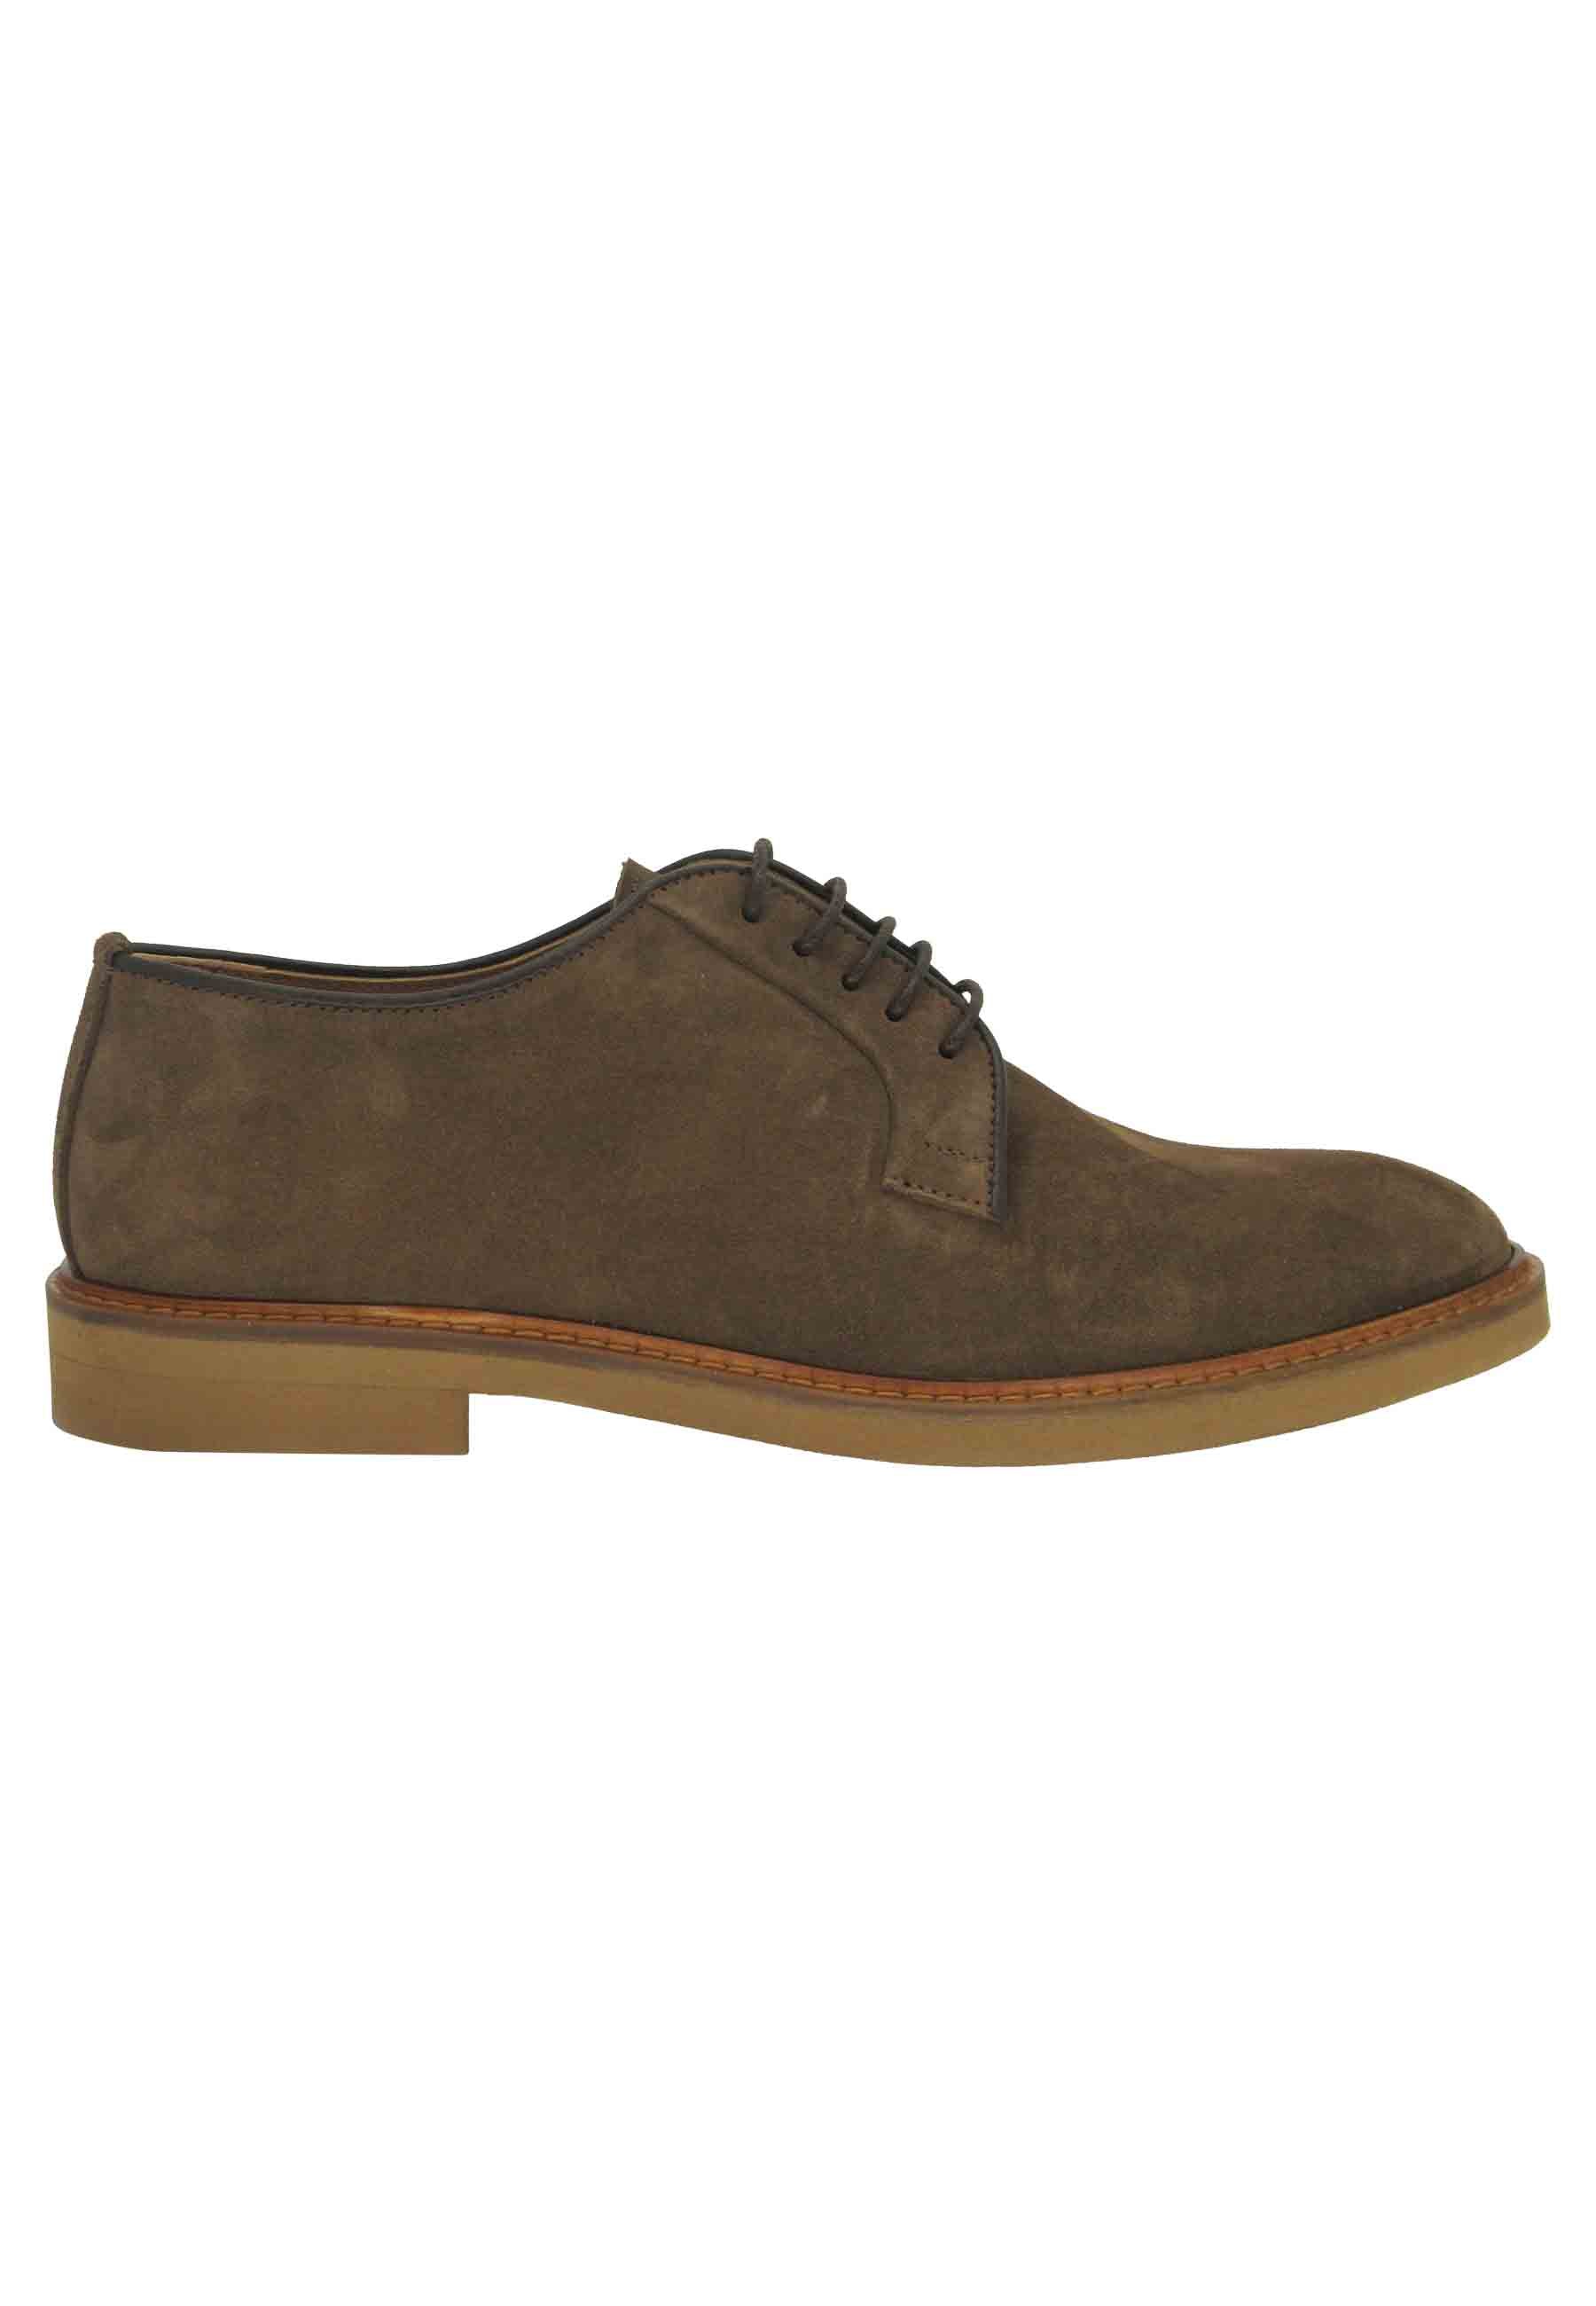 Men's lace-ups in leather suede with ultra light rubber sole